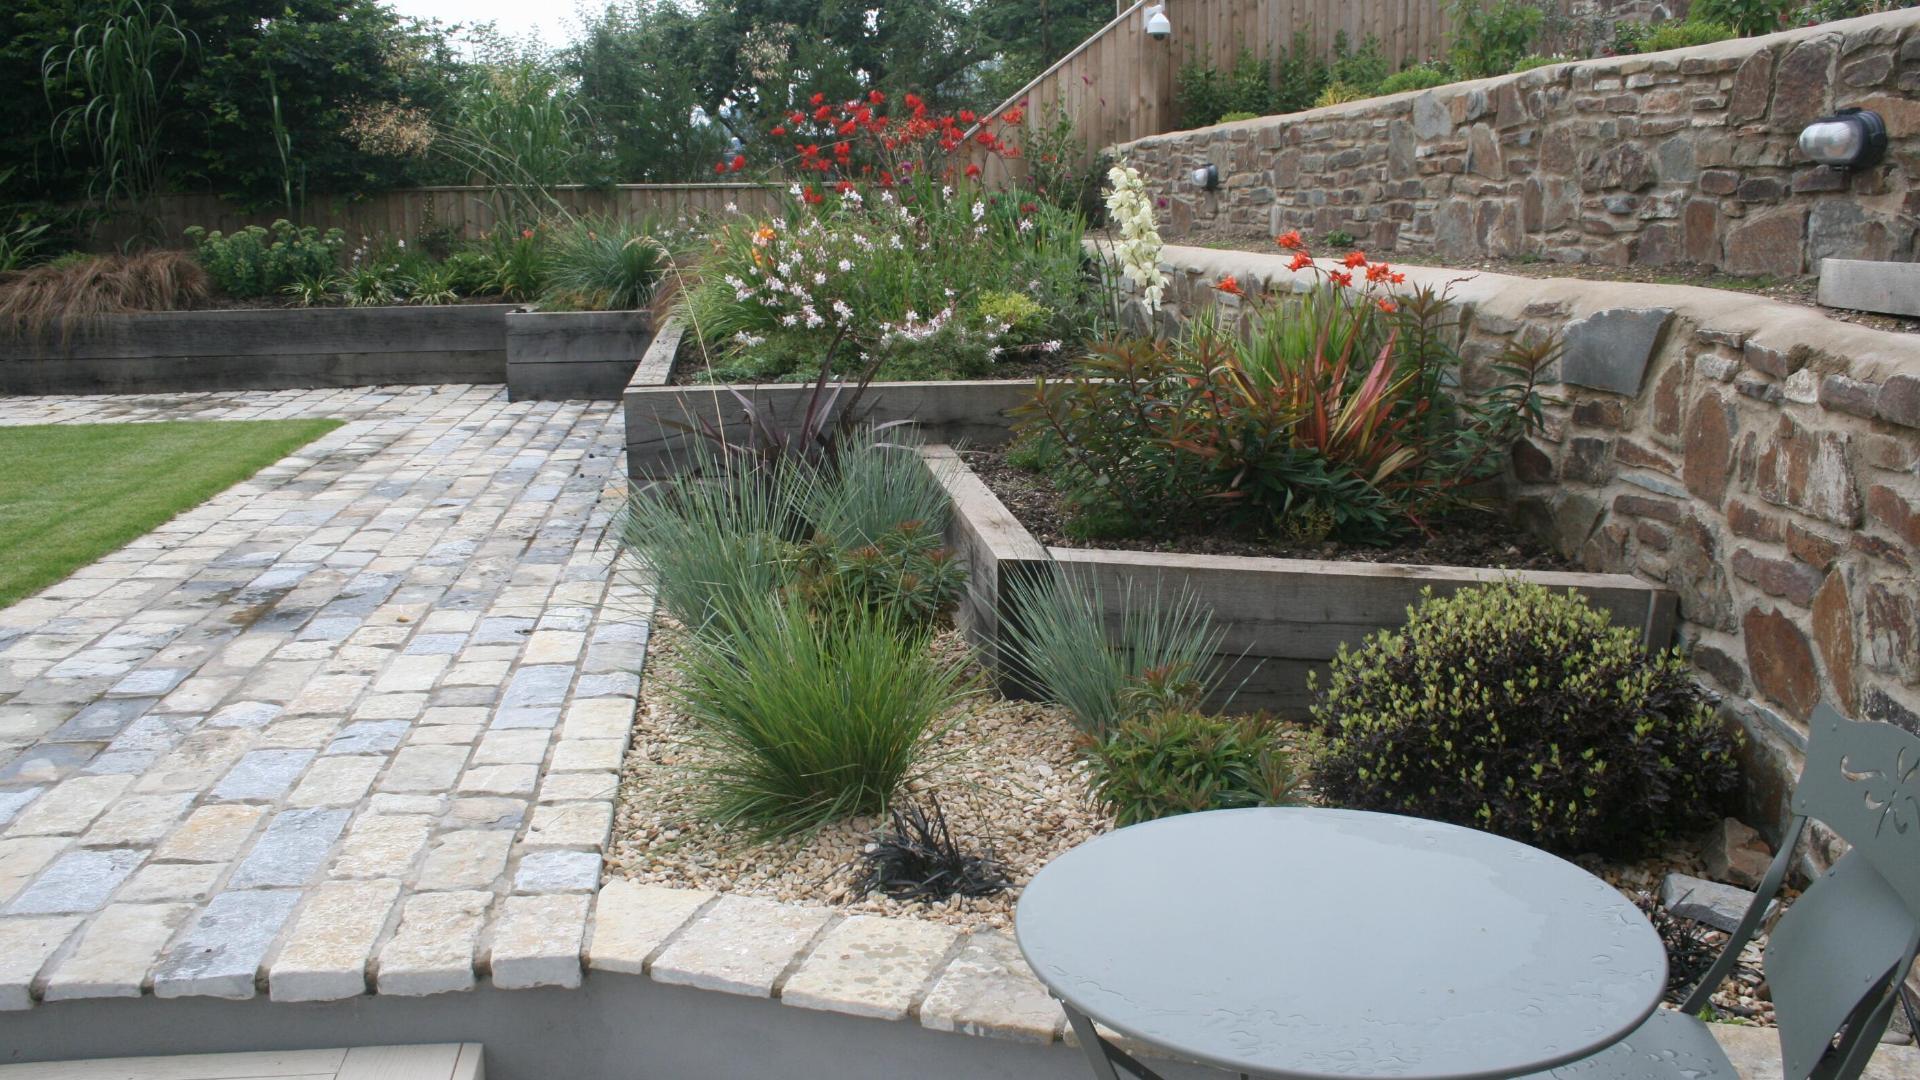 Alison Bockh Garden Design and Landscaping - North Devon - Planters and raised beds looking very happy